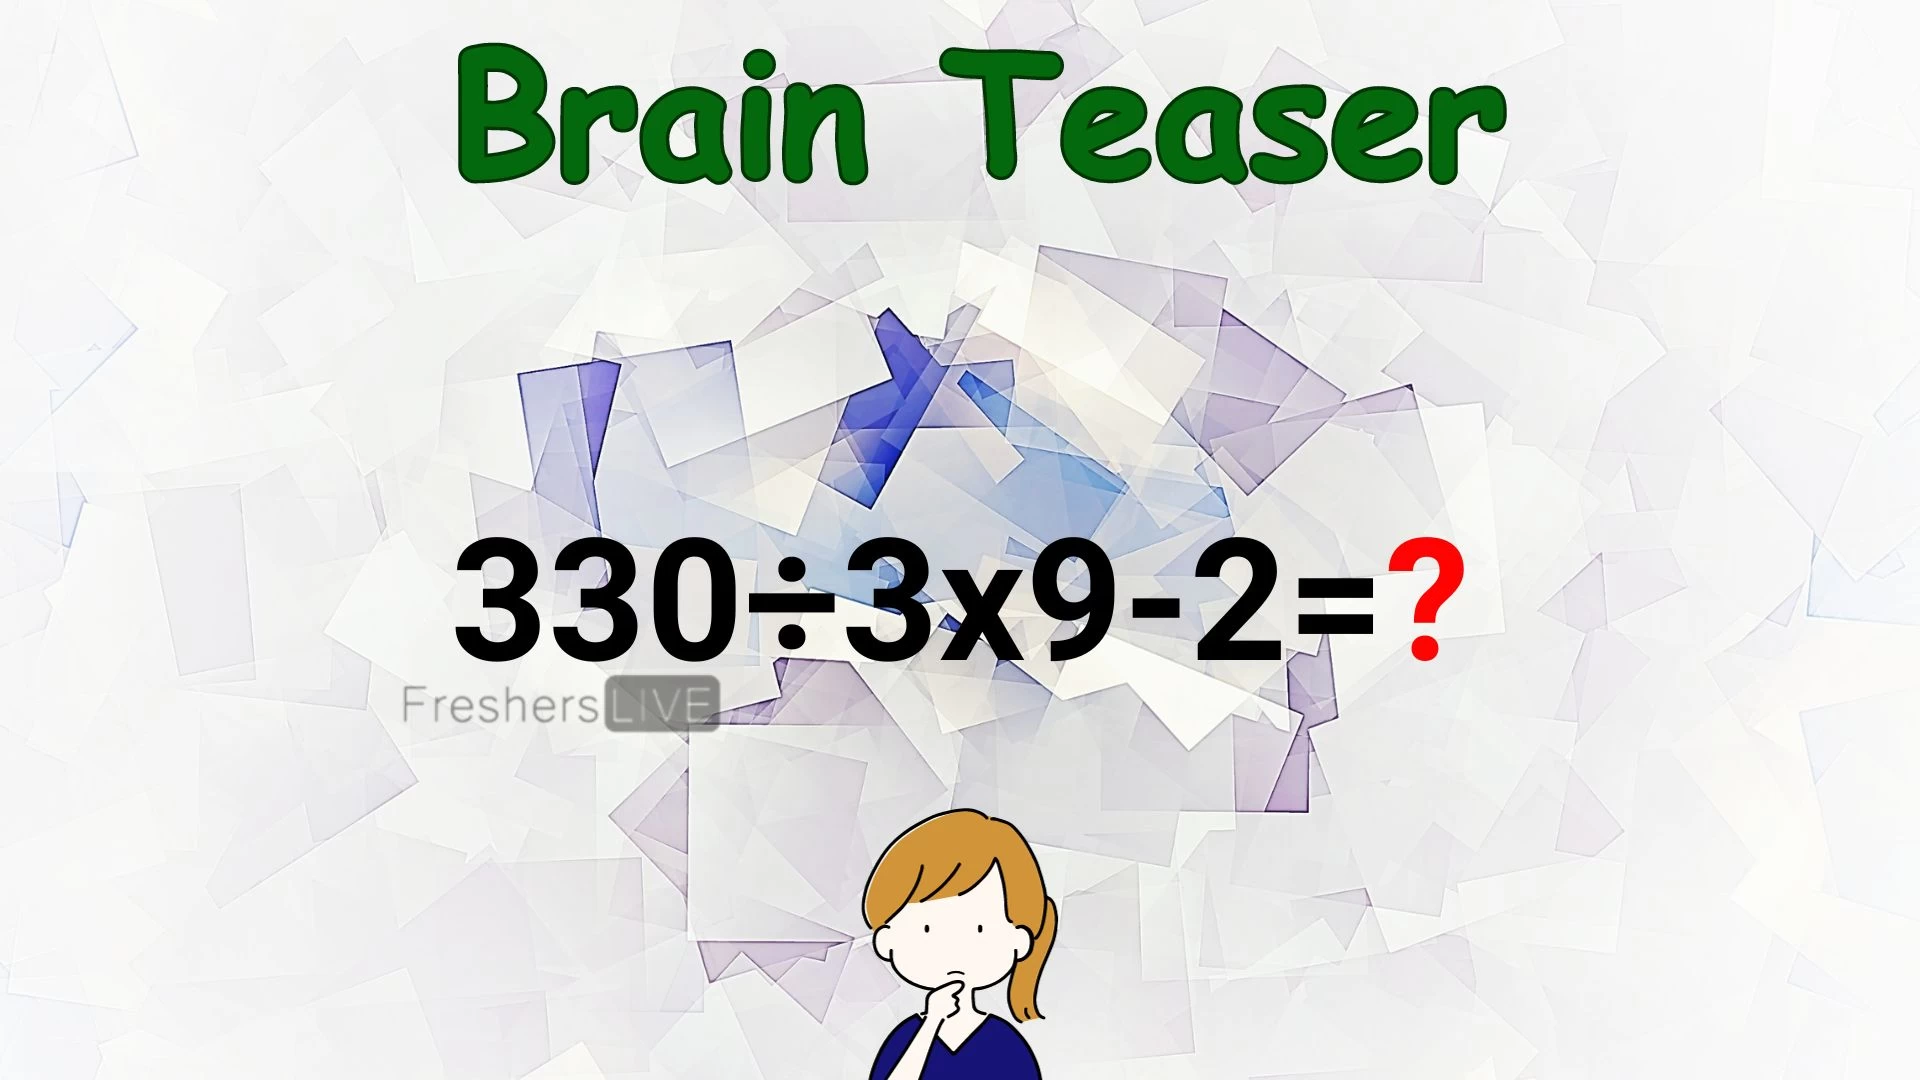 Can You Solve This Challenging Math Problem? Evaluate 330÷3x9-2